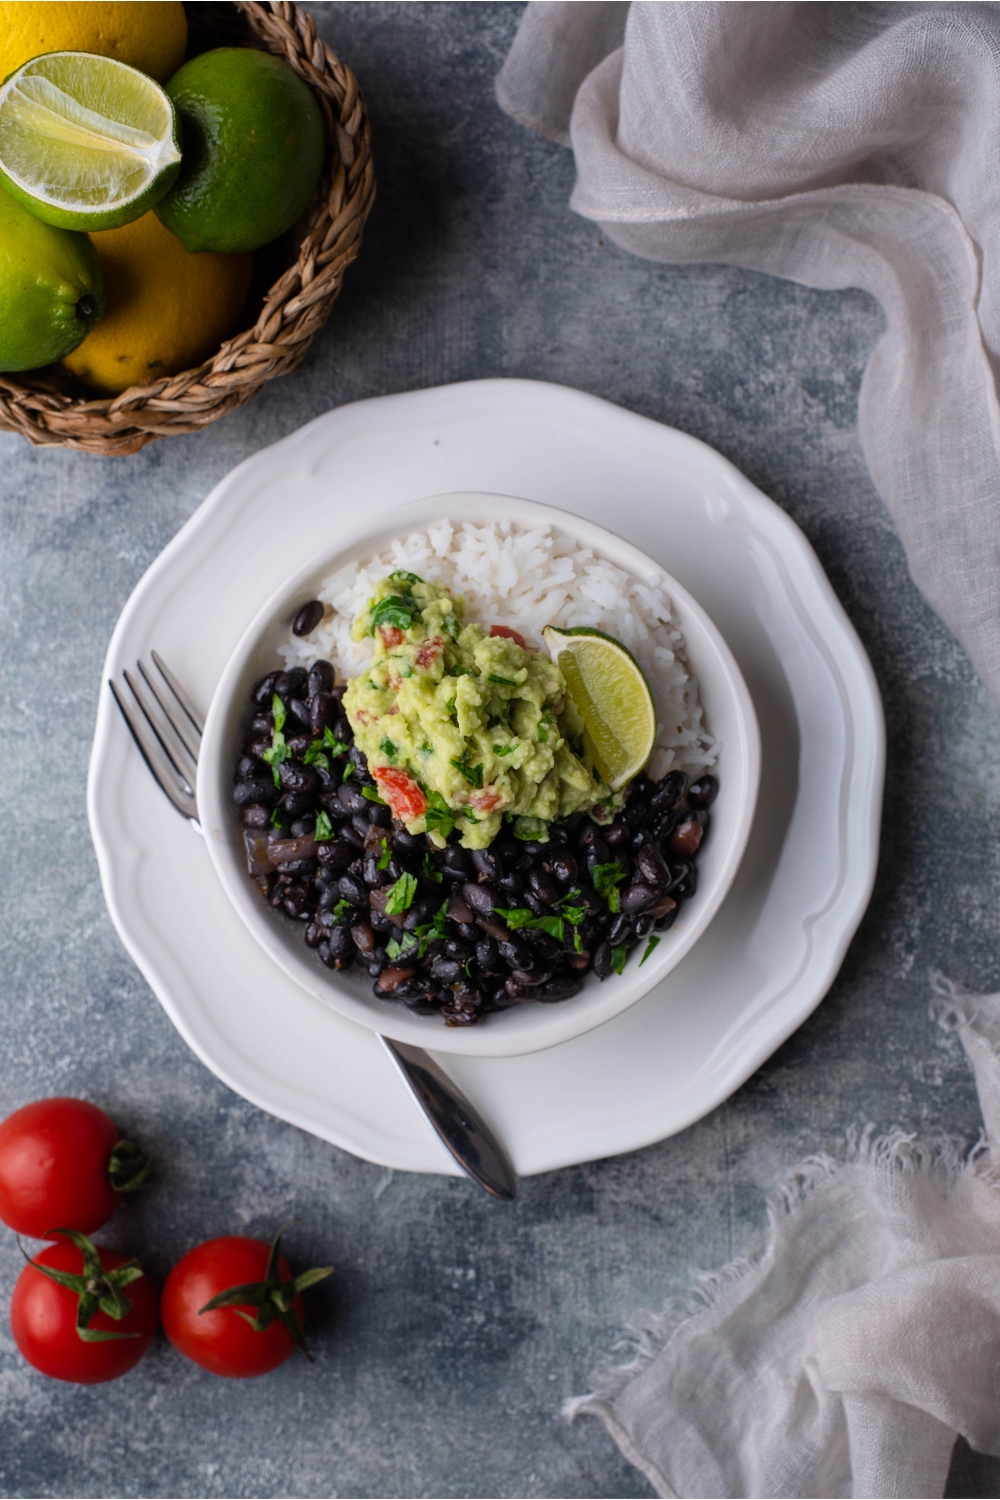 Overview of Chipotle black beans in a white bowl layered on a white plate, served with white rice, guacamole, a lime wedge, and fresh herbs. A fork is on the plate.